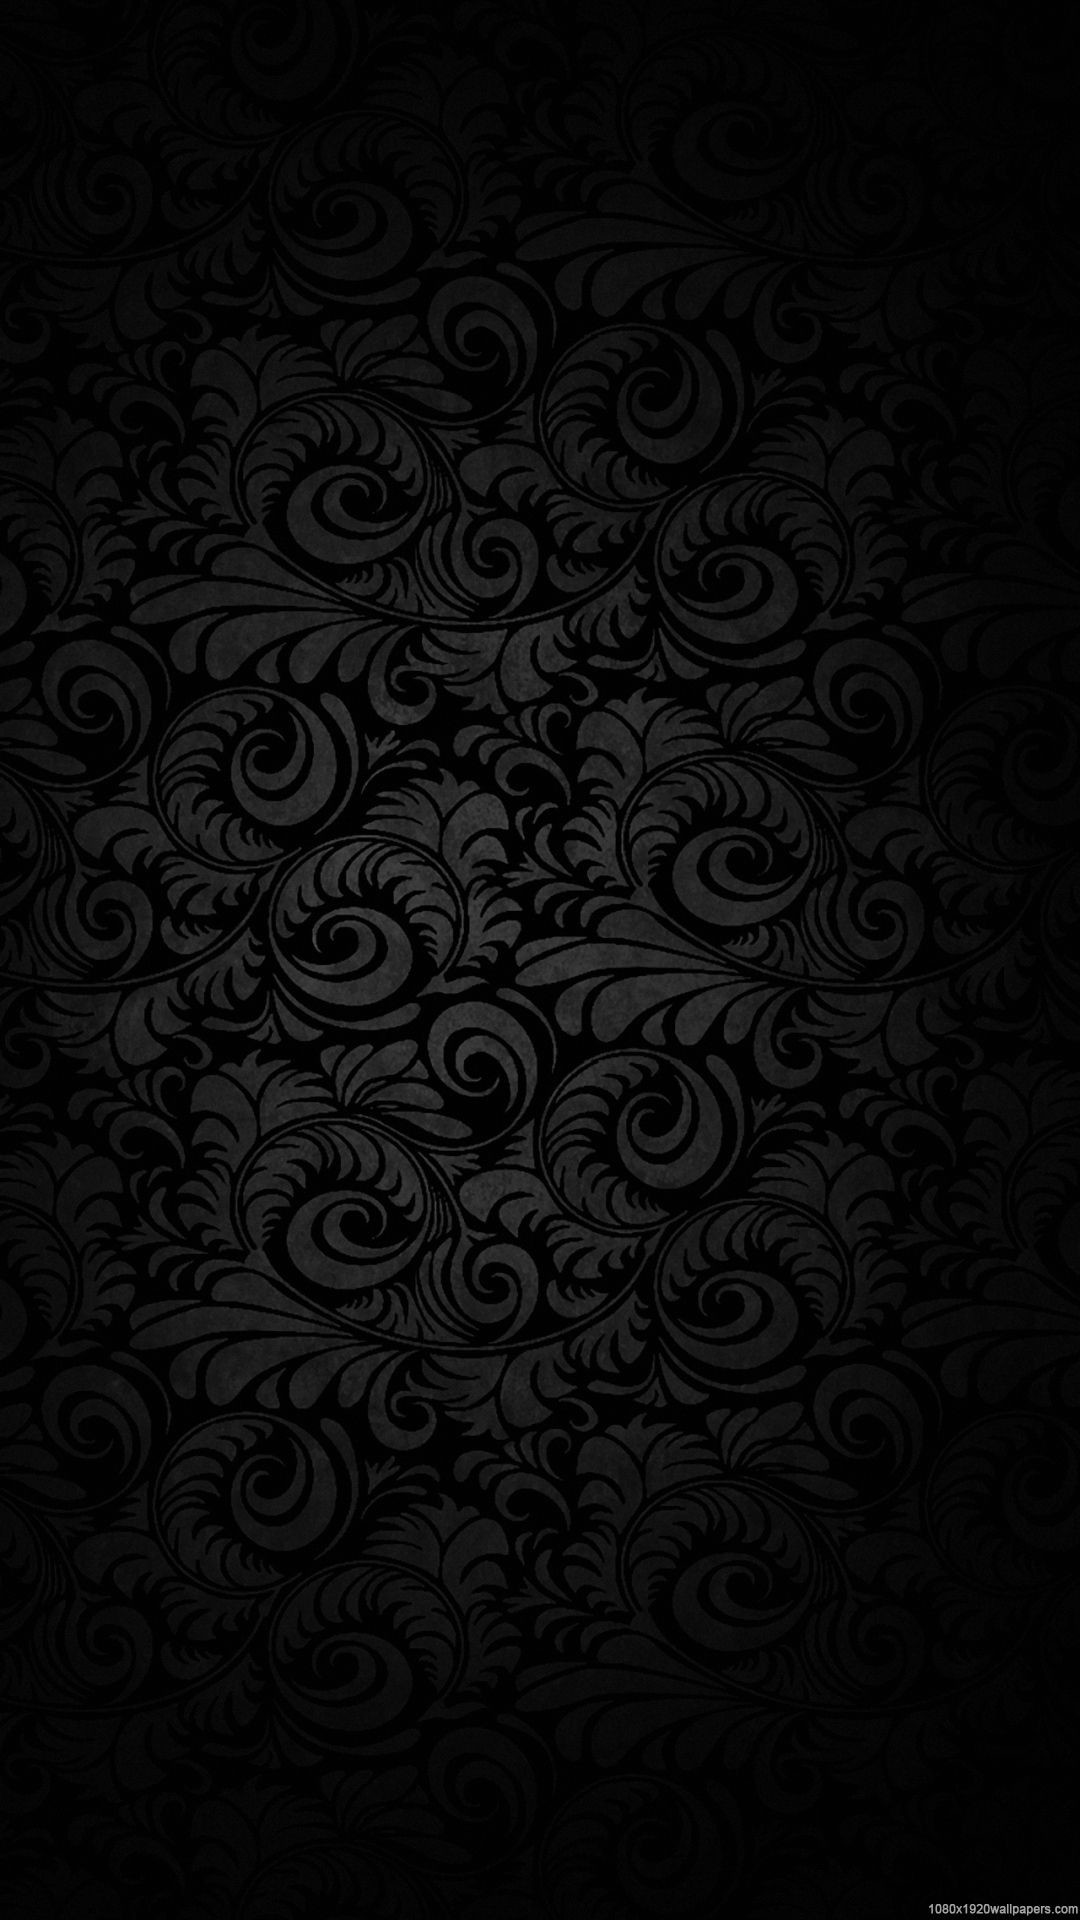 Black Theme Wallpaper Hd For Mobile I Made 3 Dark Theme Wallpapers